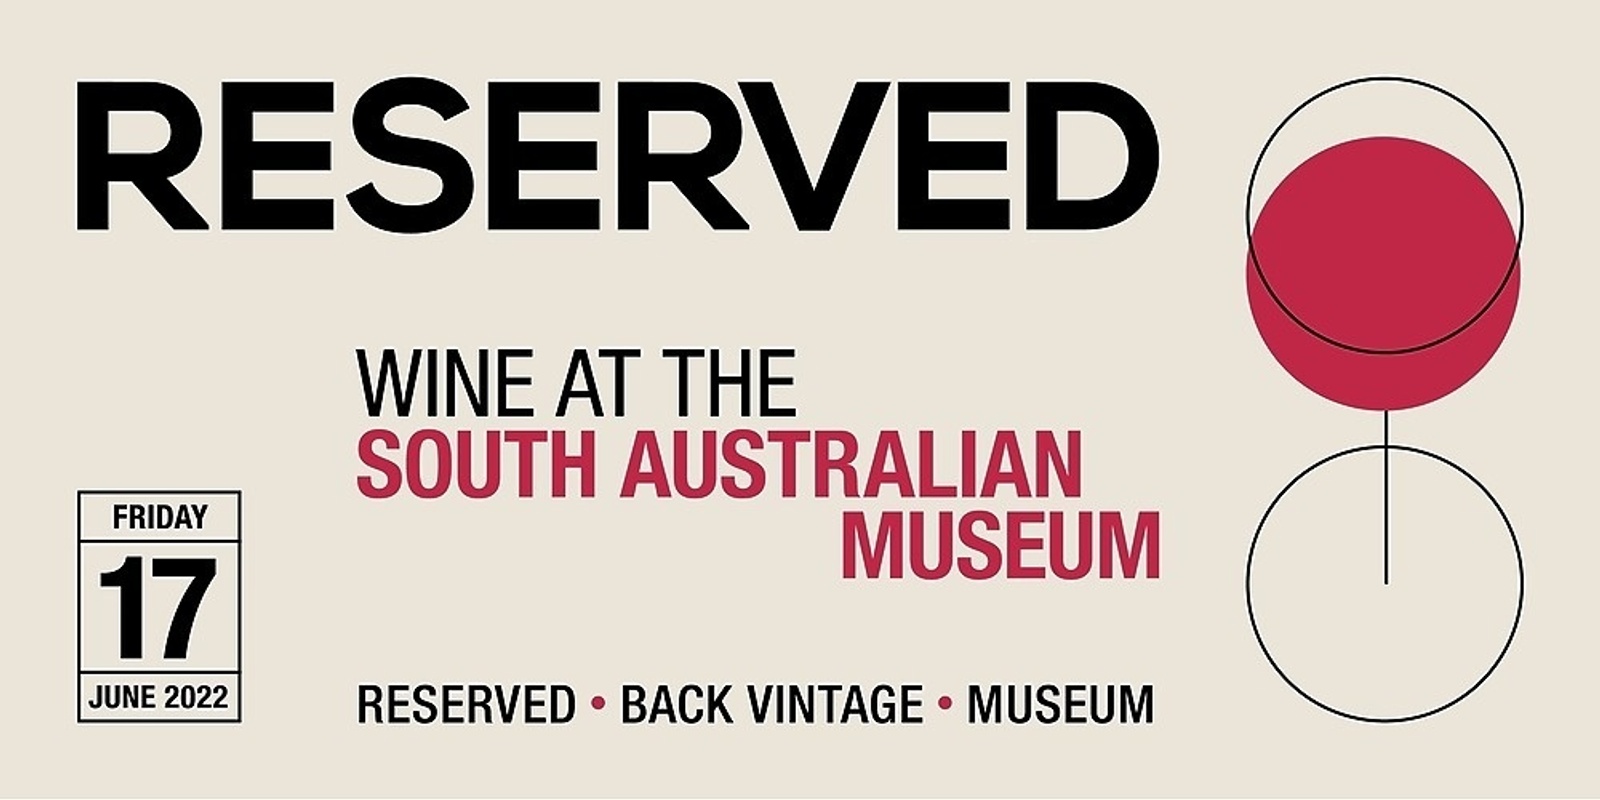 Banner image for RESERVED, wine at the South Australian Museum.